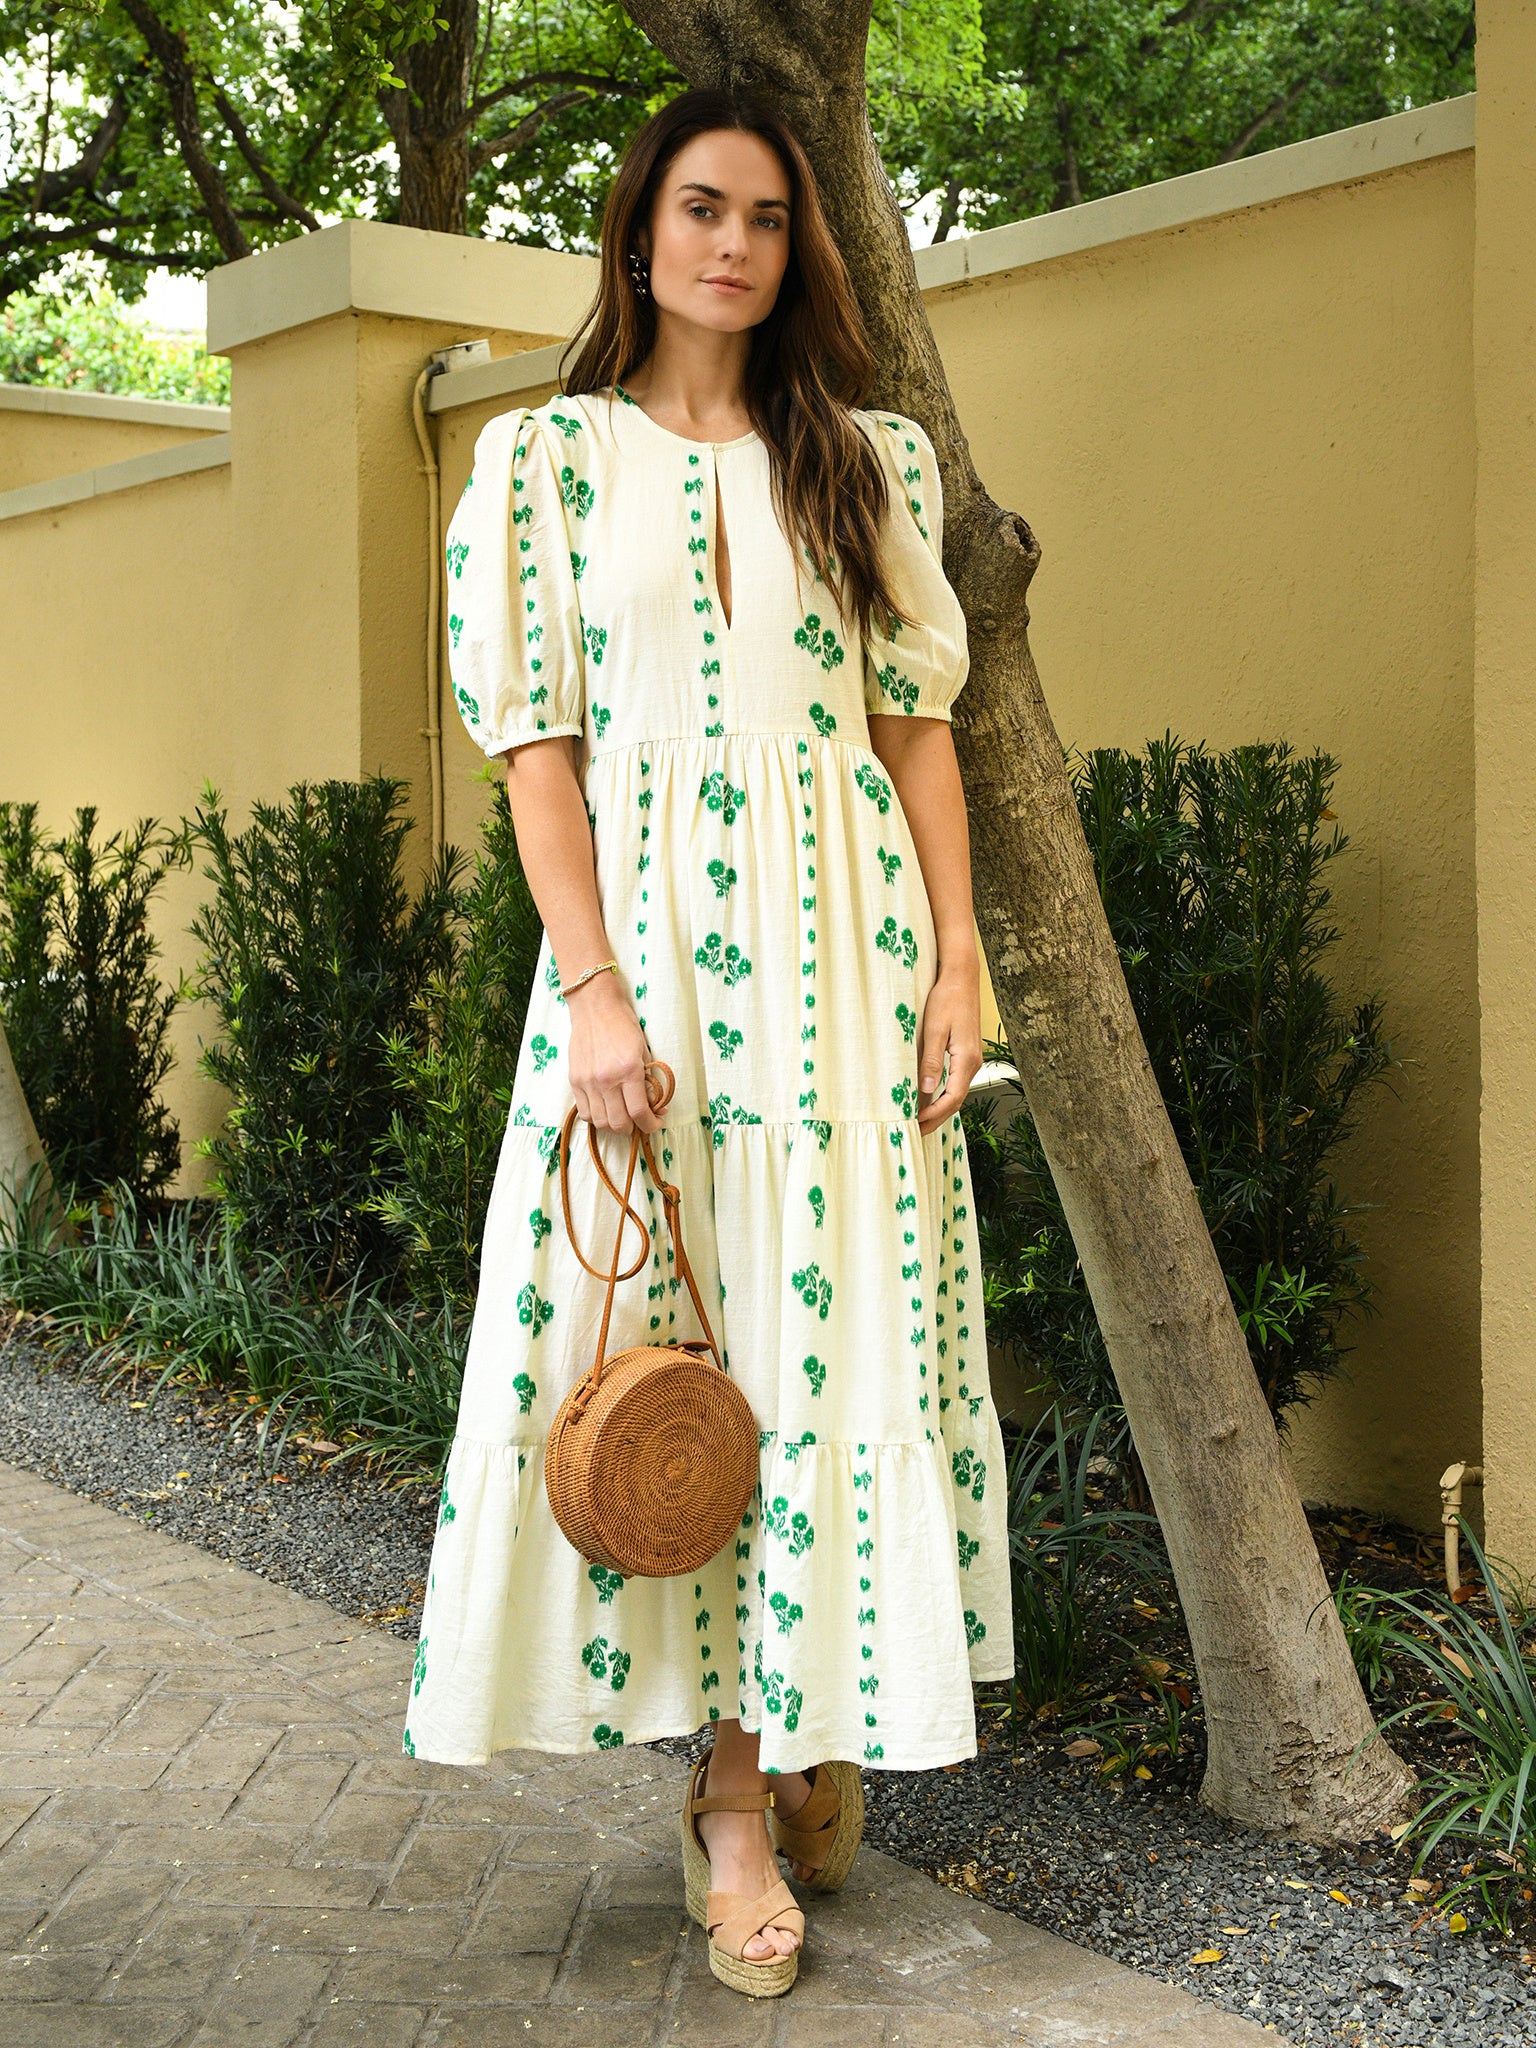 Oliphant Dresses: Elegant Styles for Every Occasion